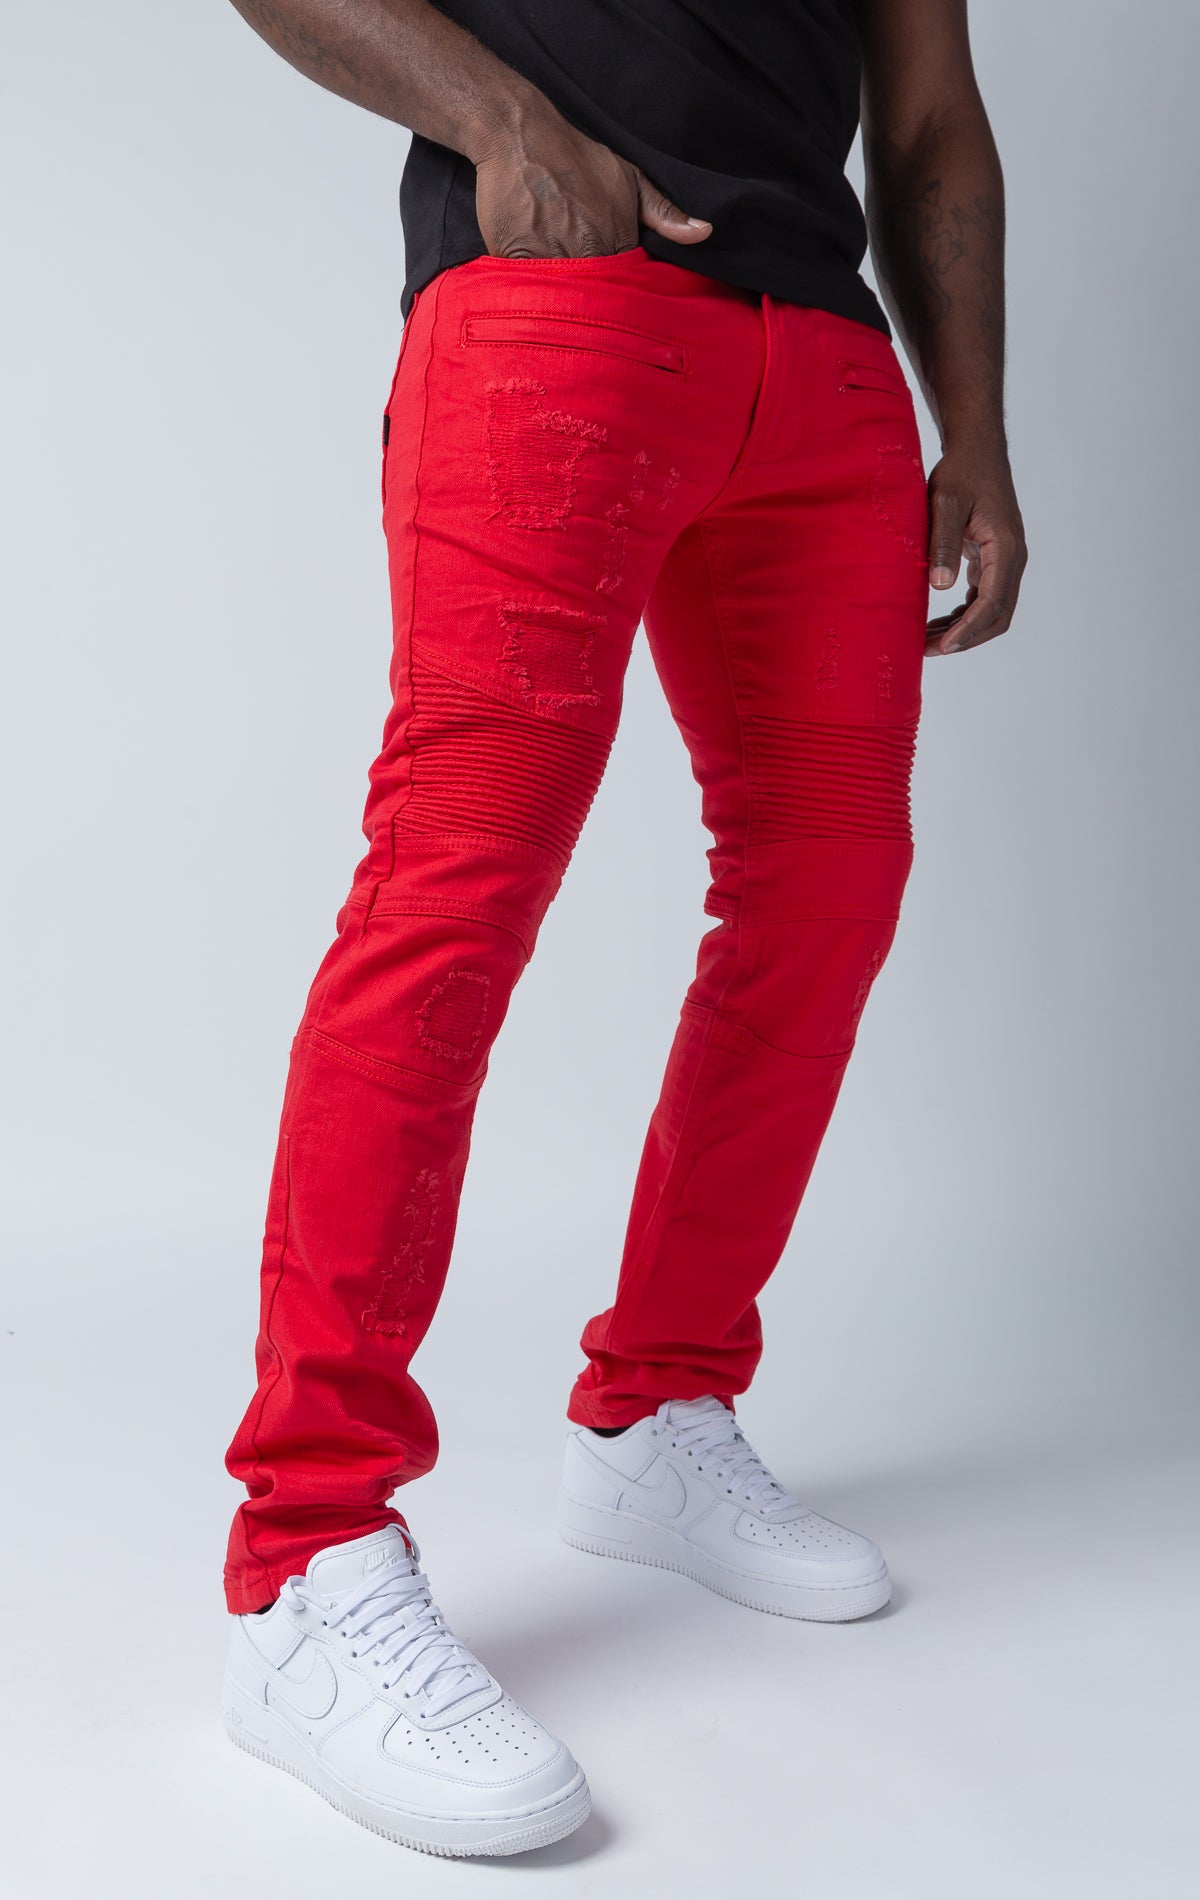 Red pants with rip and repair design and slim fit